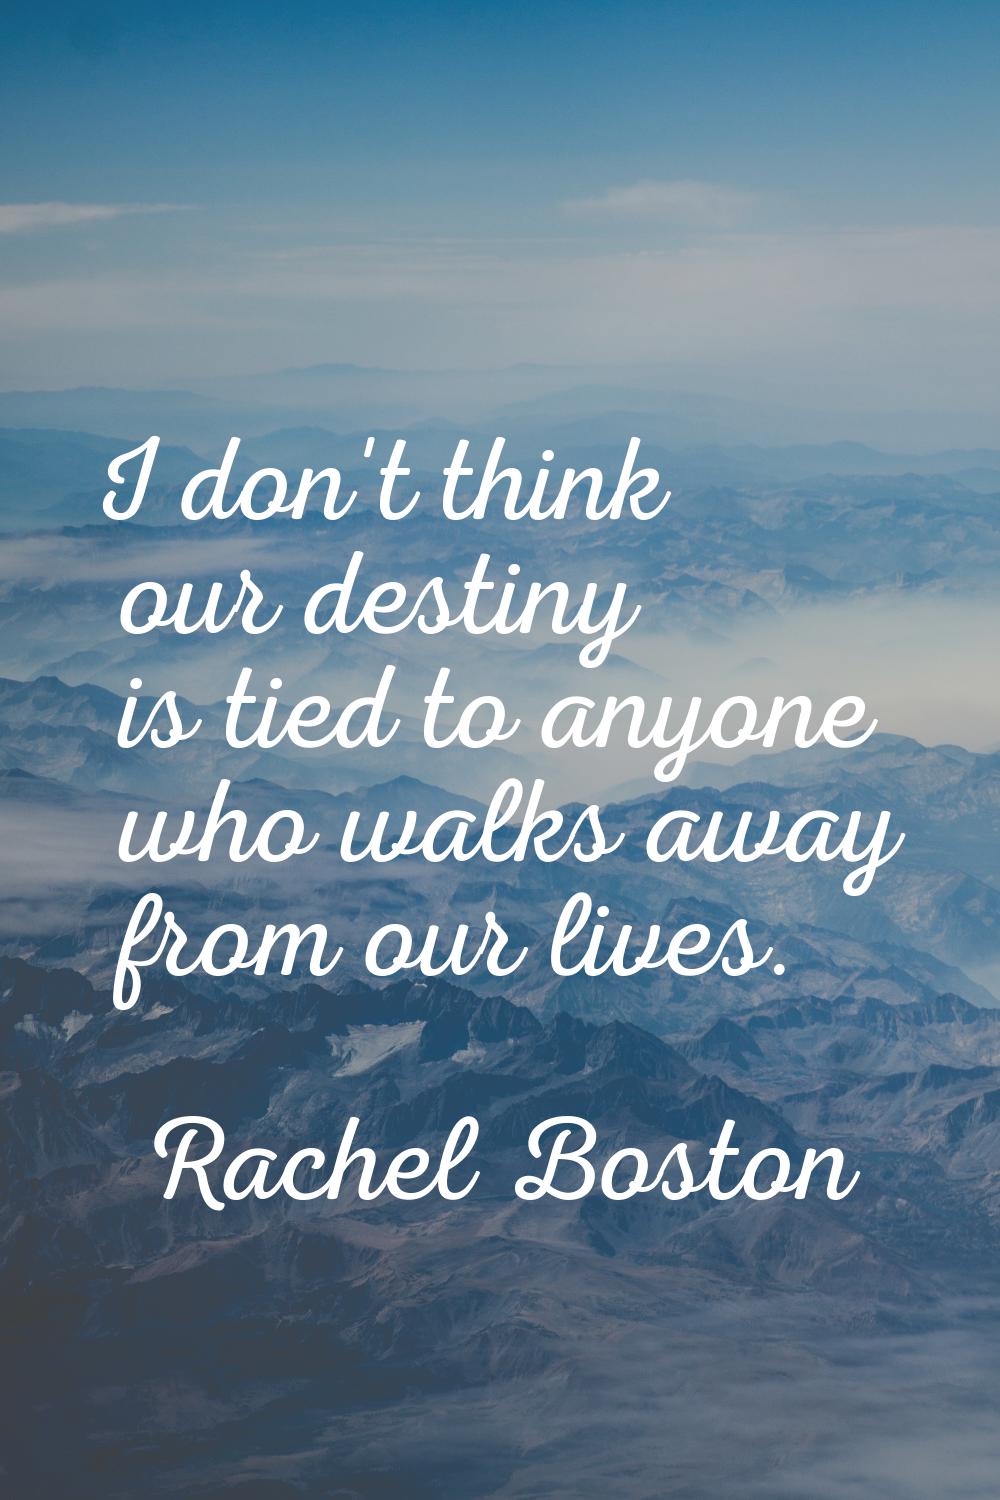 I don't think our destiny is tied to anyone who walks away from our lives.